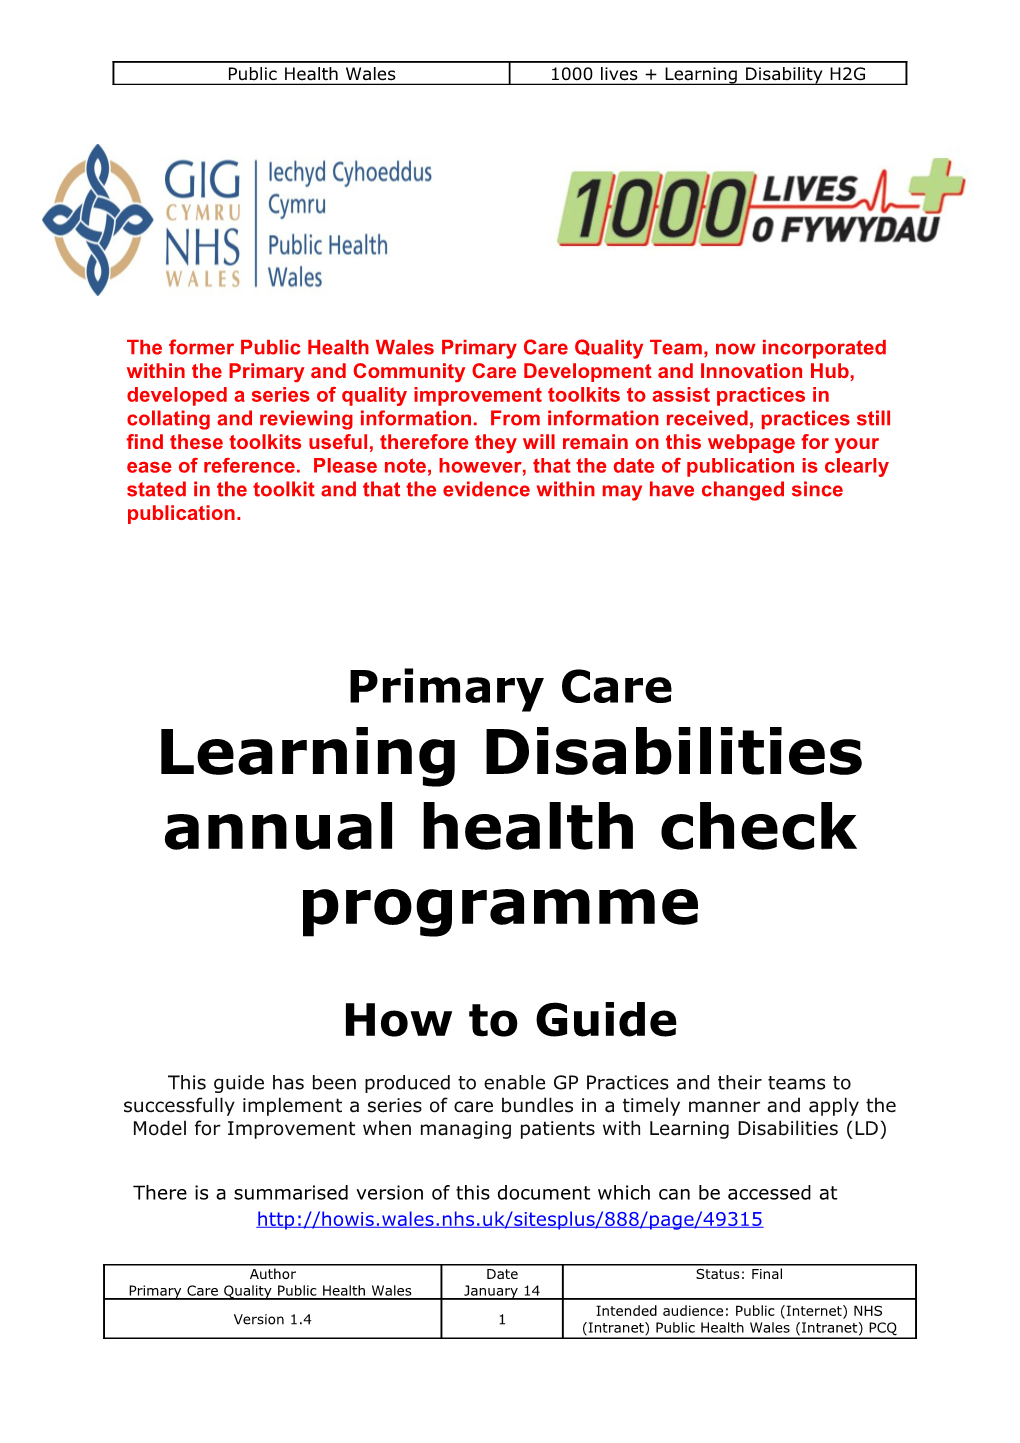 Learning Disabilities Annual Health Check Programme